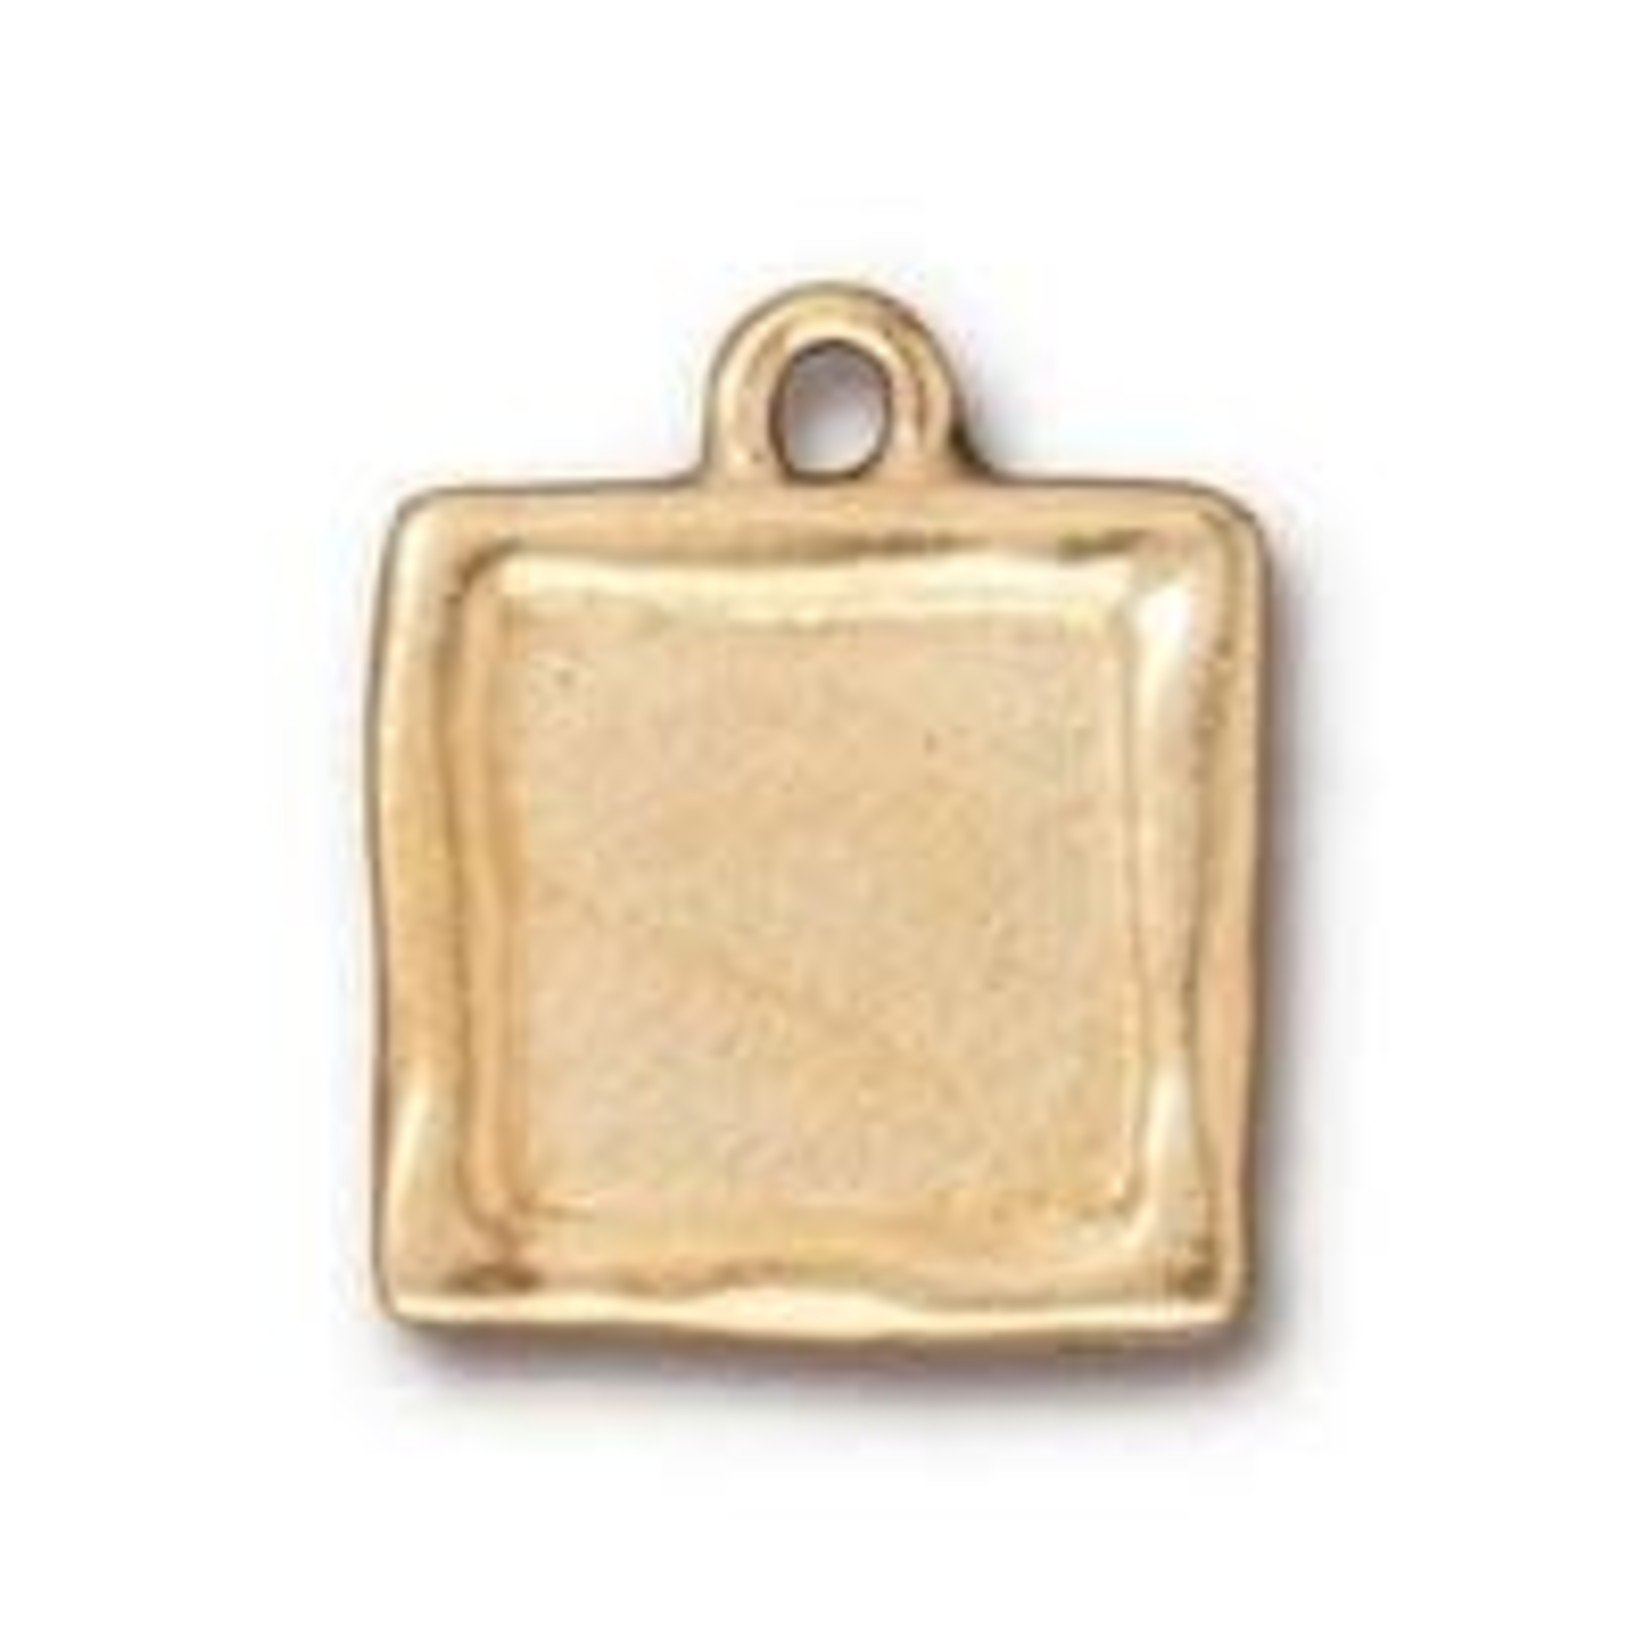 TierraCast Gold Plated 17mm Square Picture Frame Charm